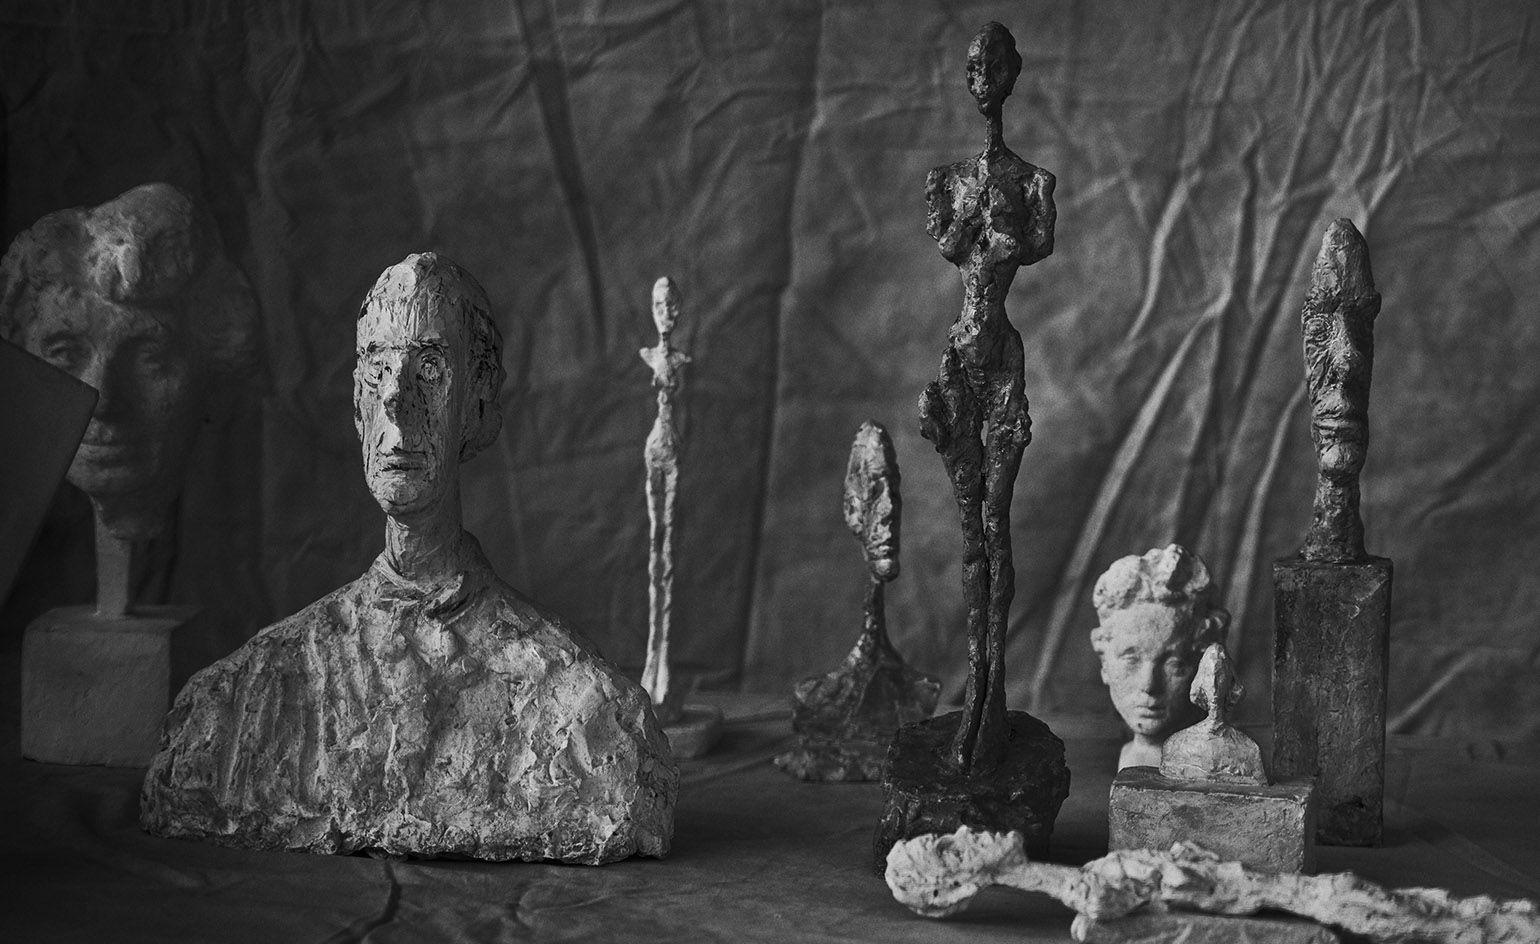 Giacometti's sculptures come out of the shadowss of Peter Lindbergh. Wallpaper*